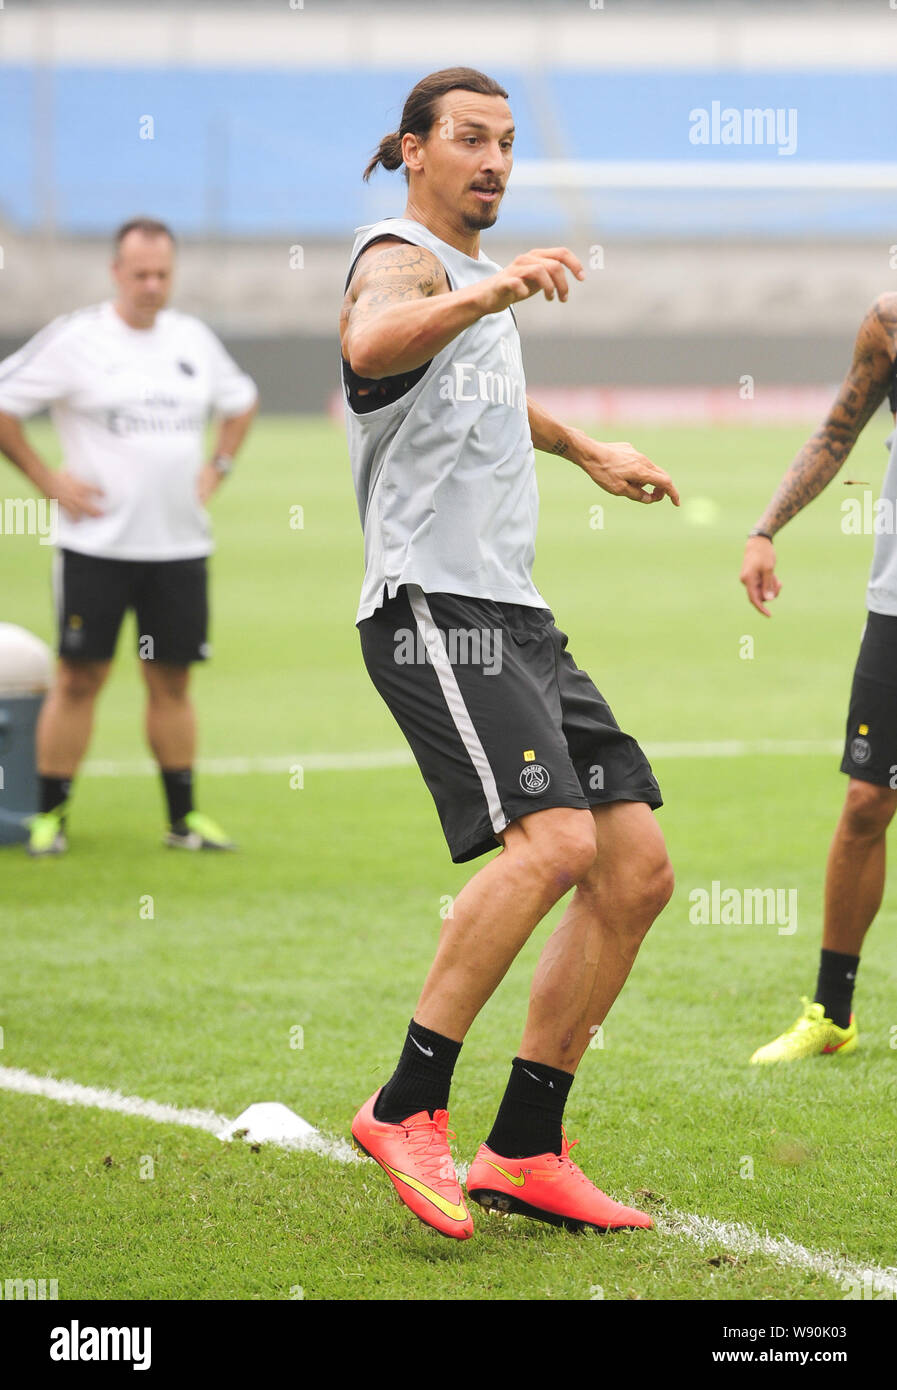 Zlatan Ibrahimovic of Paris Saint-Germain football club attends a training session ahead of the French Super Cup soccer match against Guingamp in Beij Stock Photo